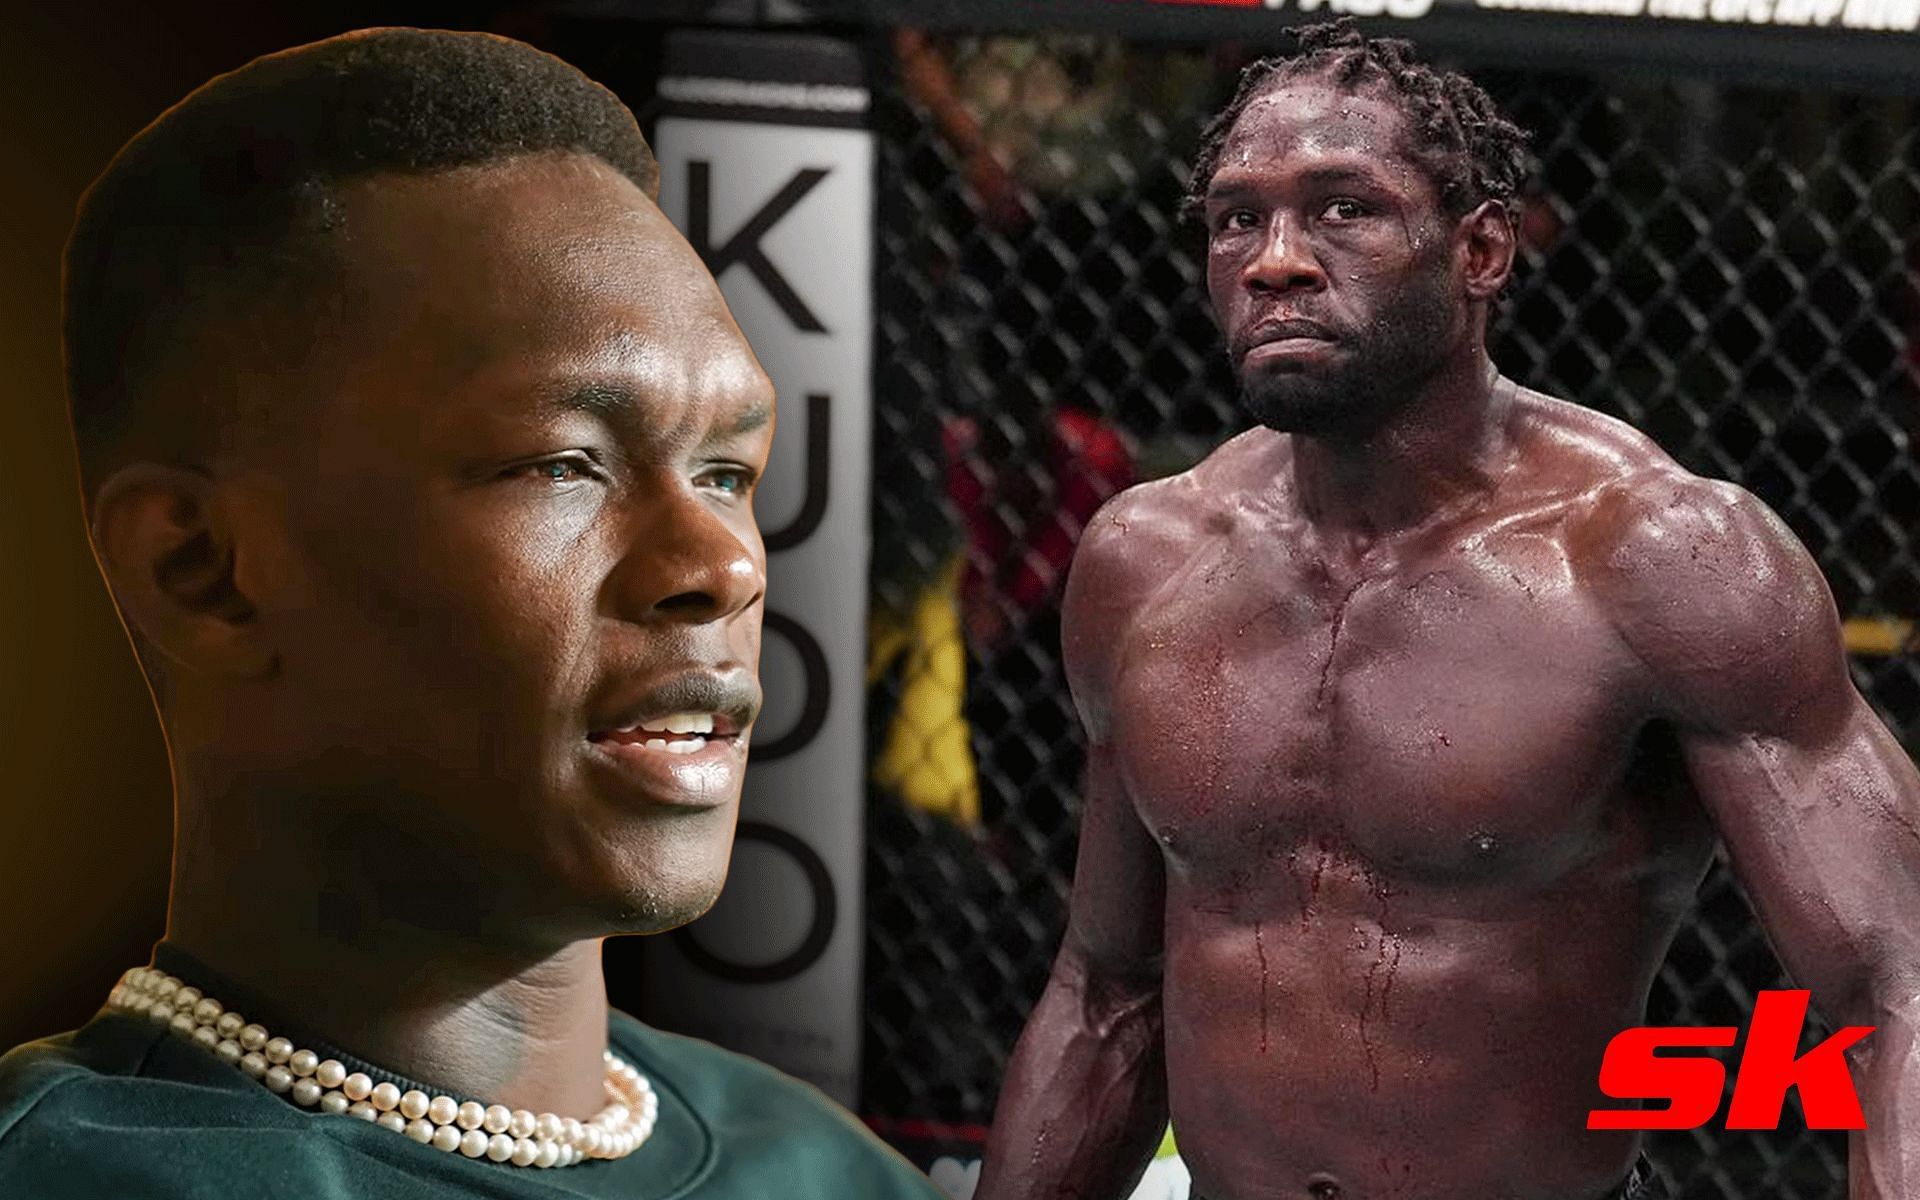 Israel Adesanya (left) and Jared Cannonier (right) [Image credits: @ufc and @stylebender on Instagram]